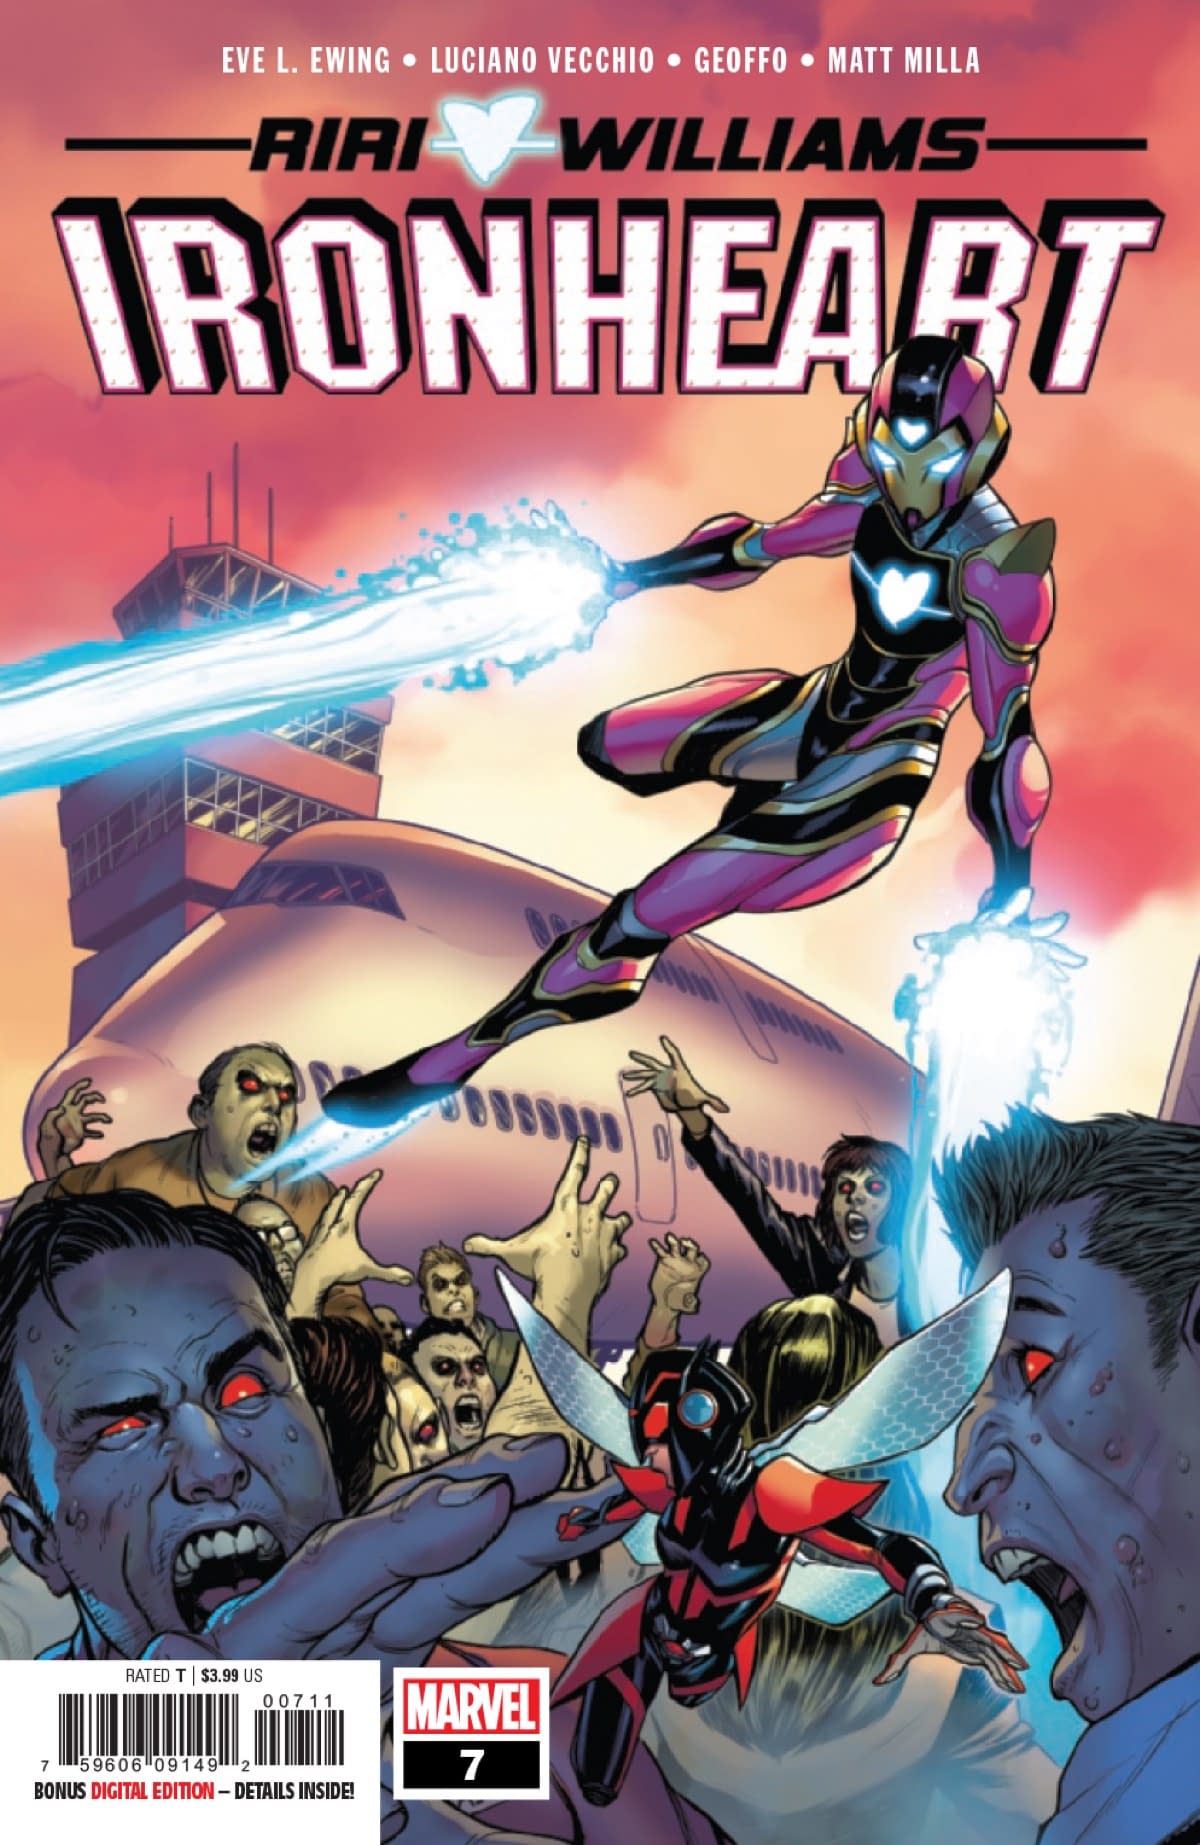 A DCeased Crossover in Ironheart #7? (Preview)